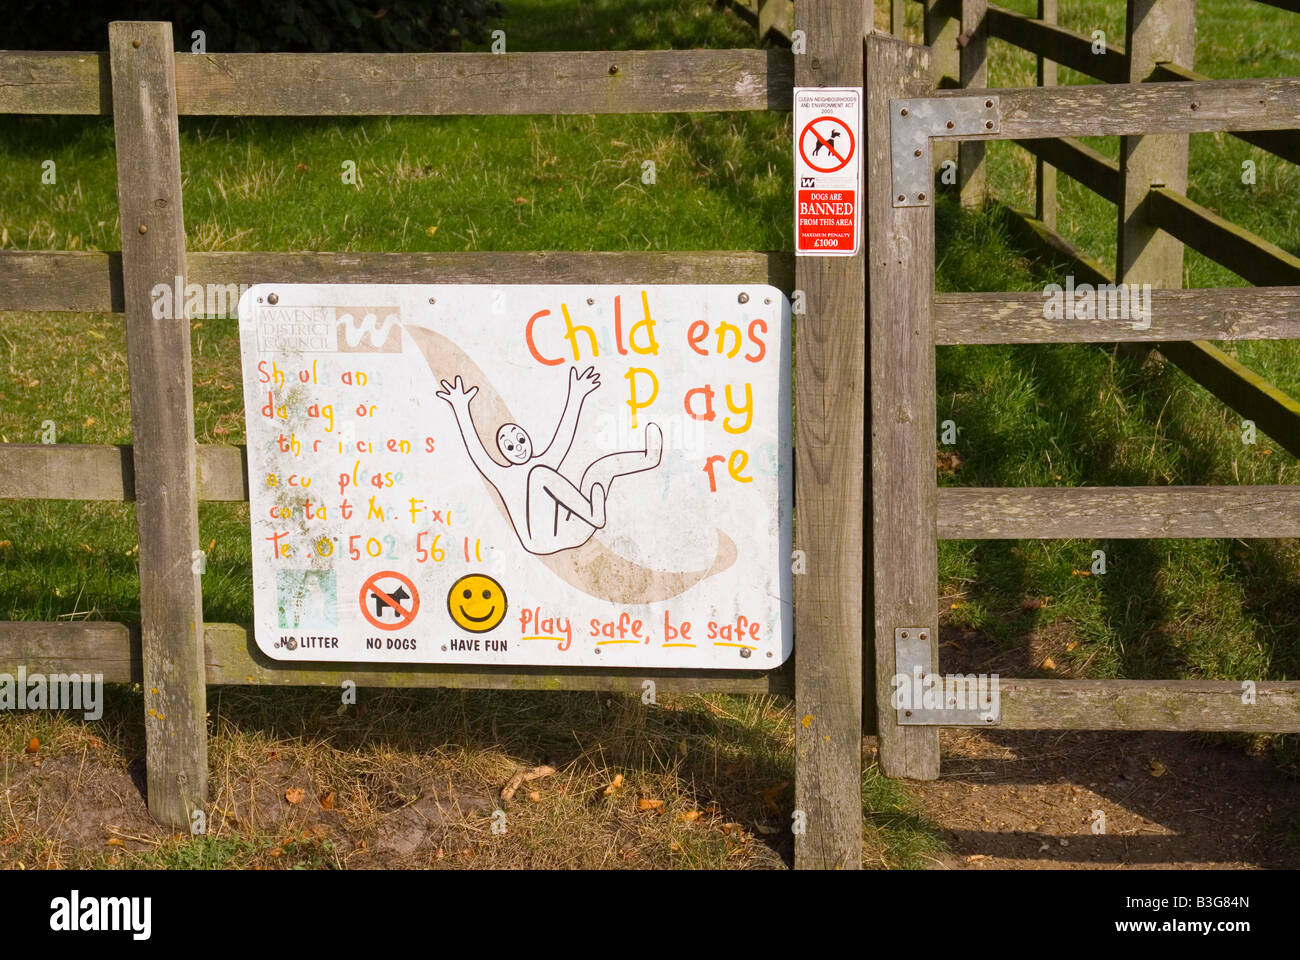 Childrens play area sign at entrance warning no dogs or litter. Stock Photo